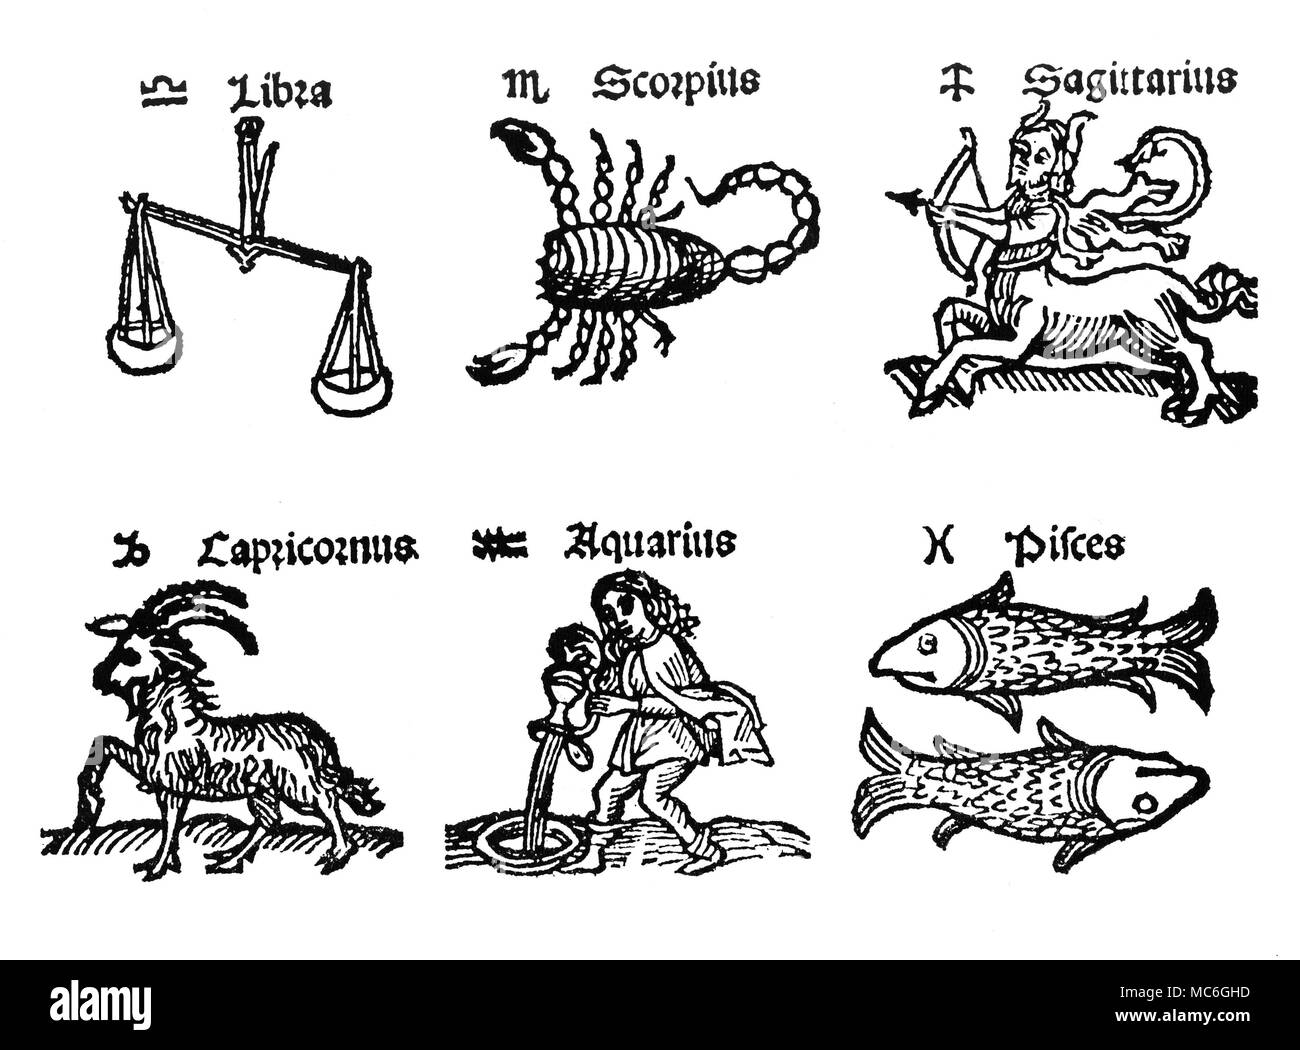 ZODIAC SIGNS The first six images of the zodiac signs, with related sigil and name. From left to right: Libra, Scorpio, Sagittarius, Capricorn, Aquarius and Pisces. Early 16th century. Stock Photo